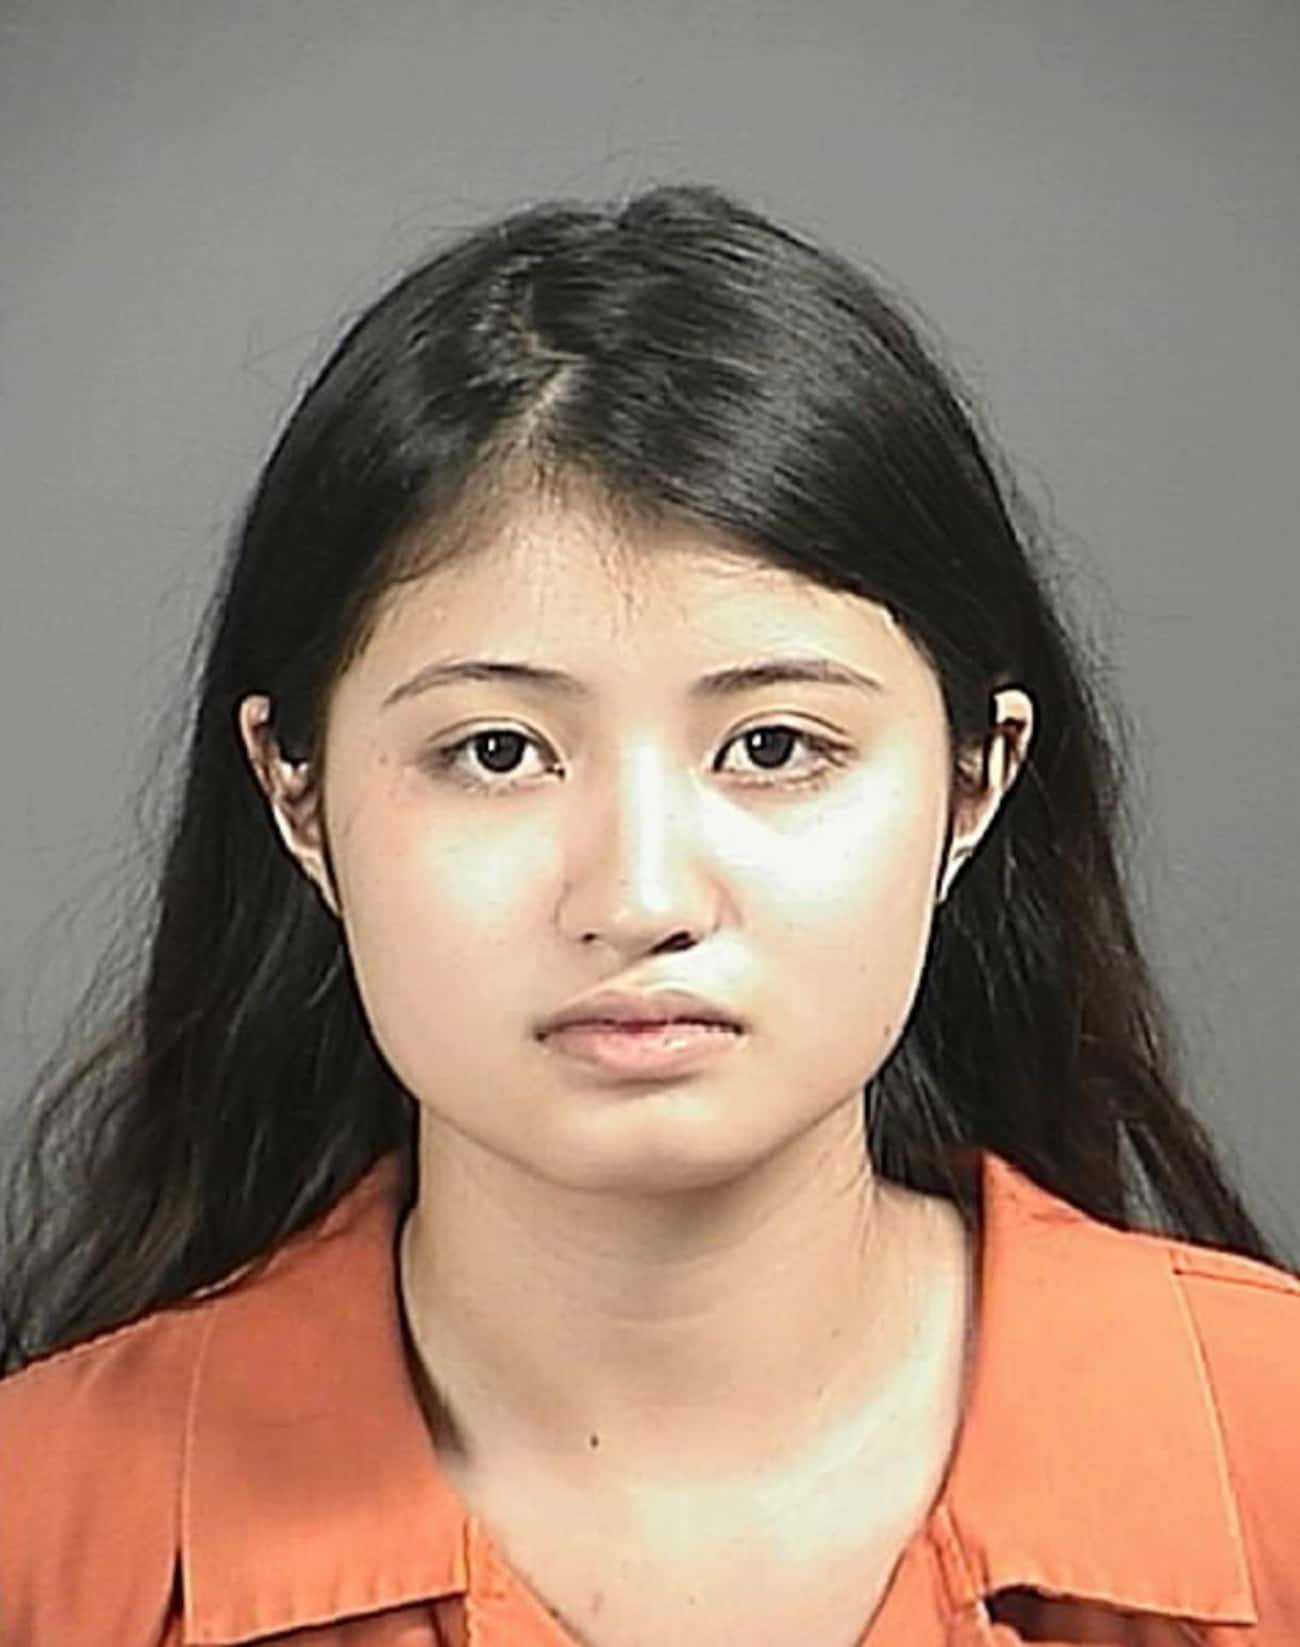 Authorities Arrested Guzman The Following Day As She Was Leaving A Parking Garage